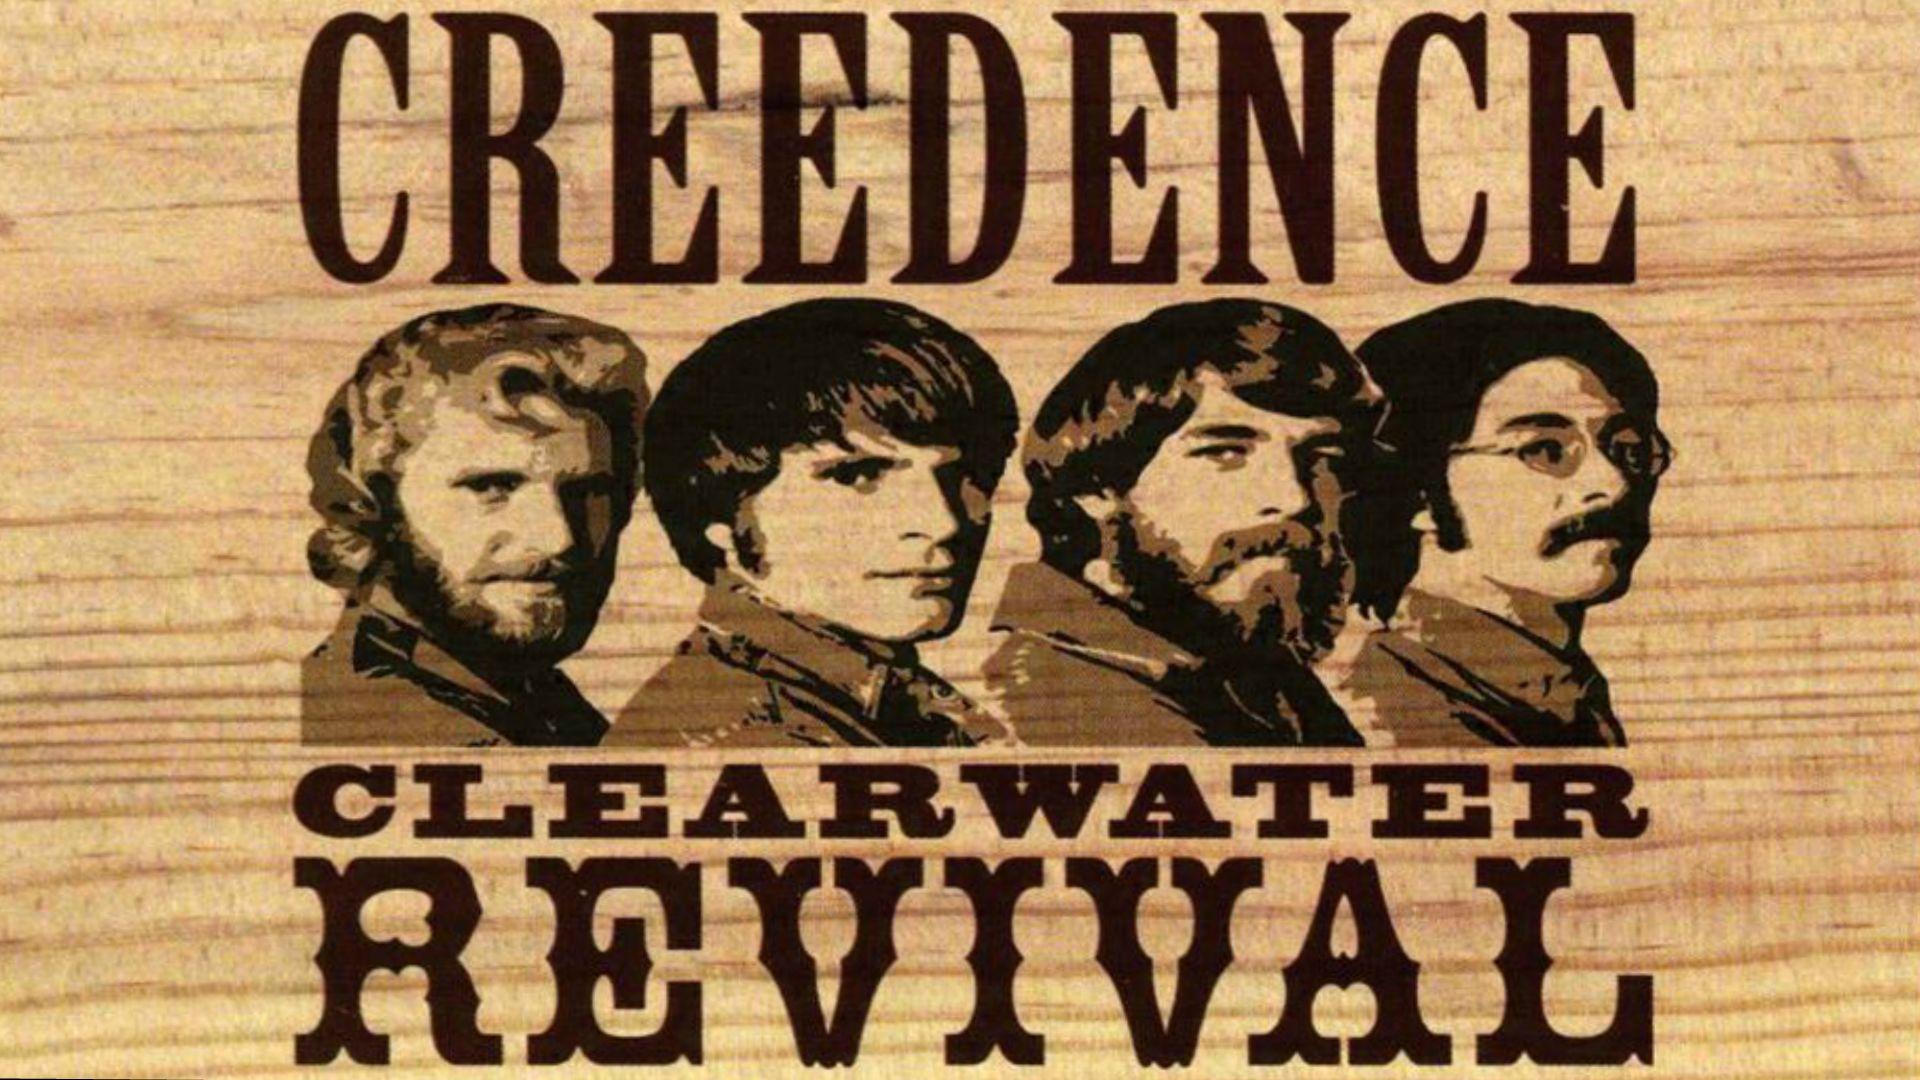 Creedence Clearwater Revival HD Wallpaper. Background